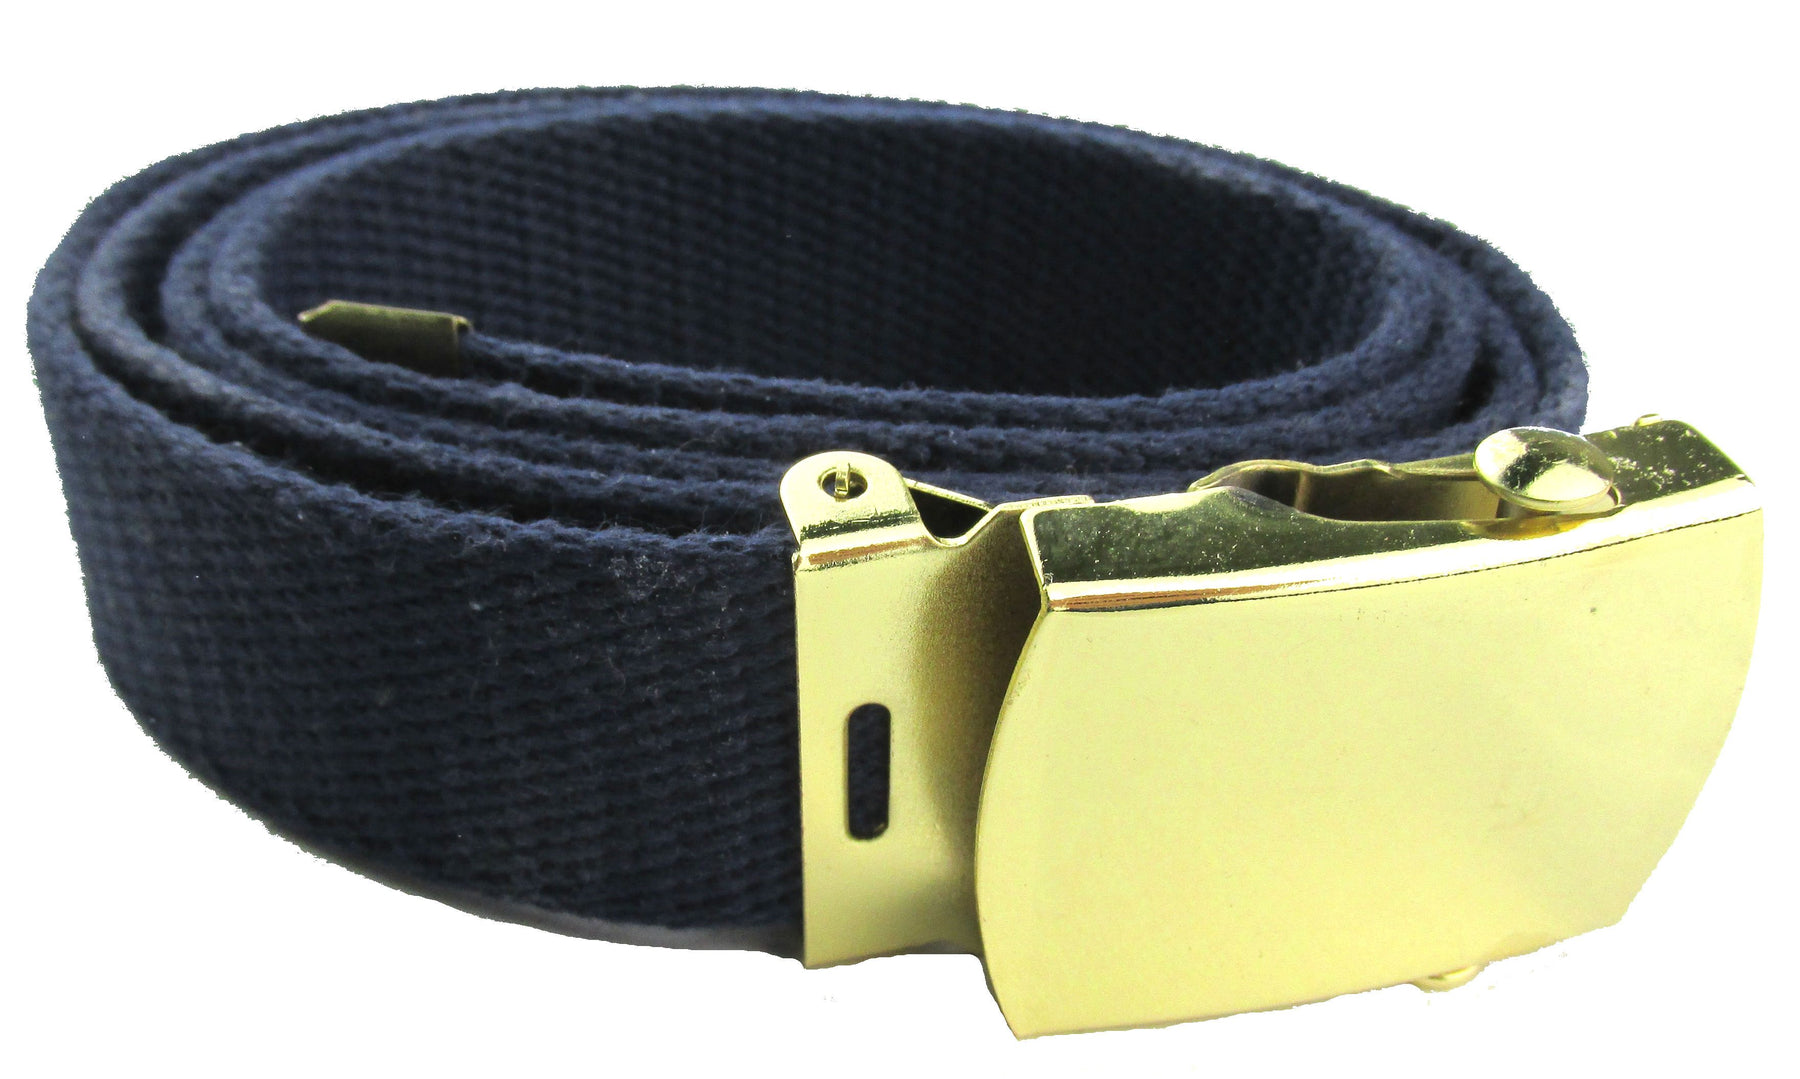 Military Web Belt with Closed Buckle